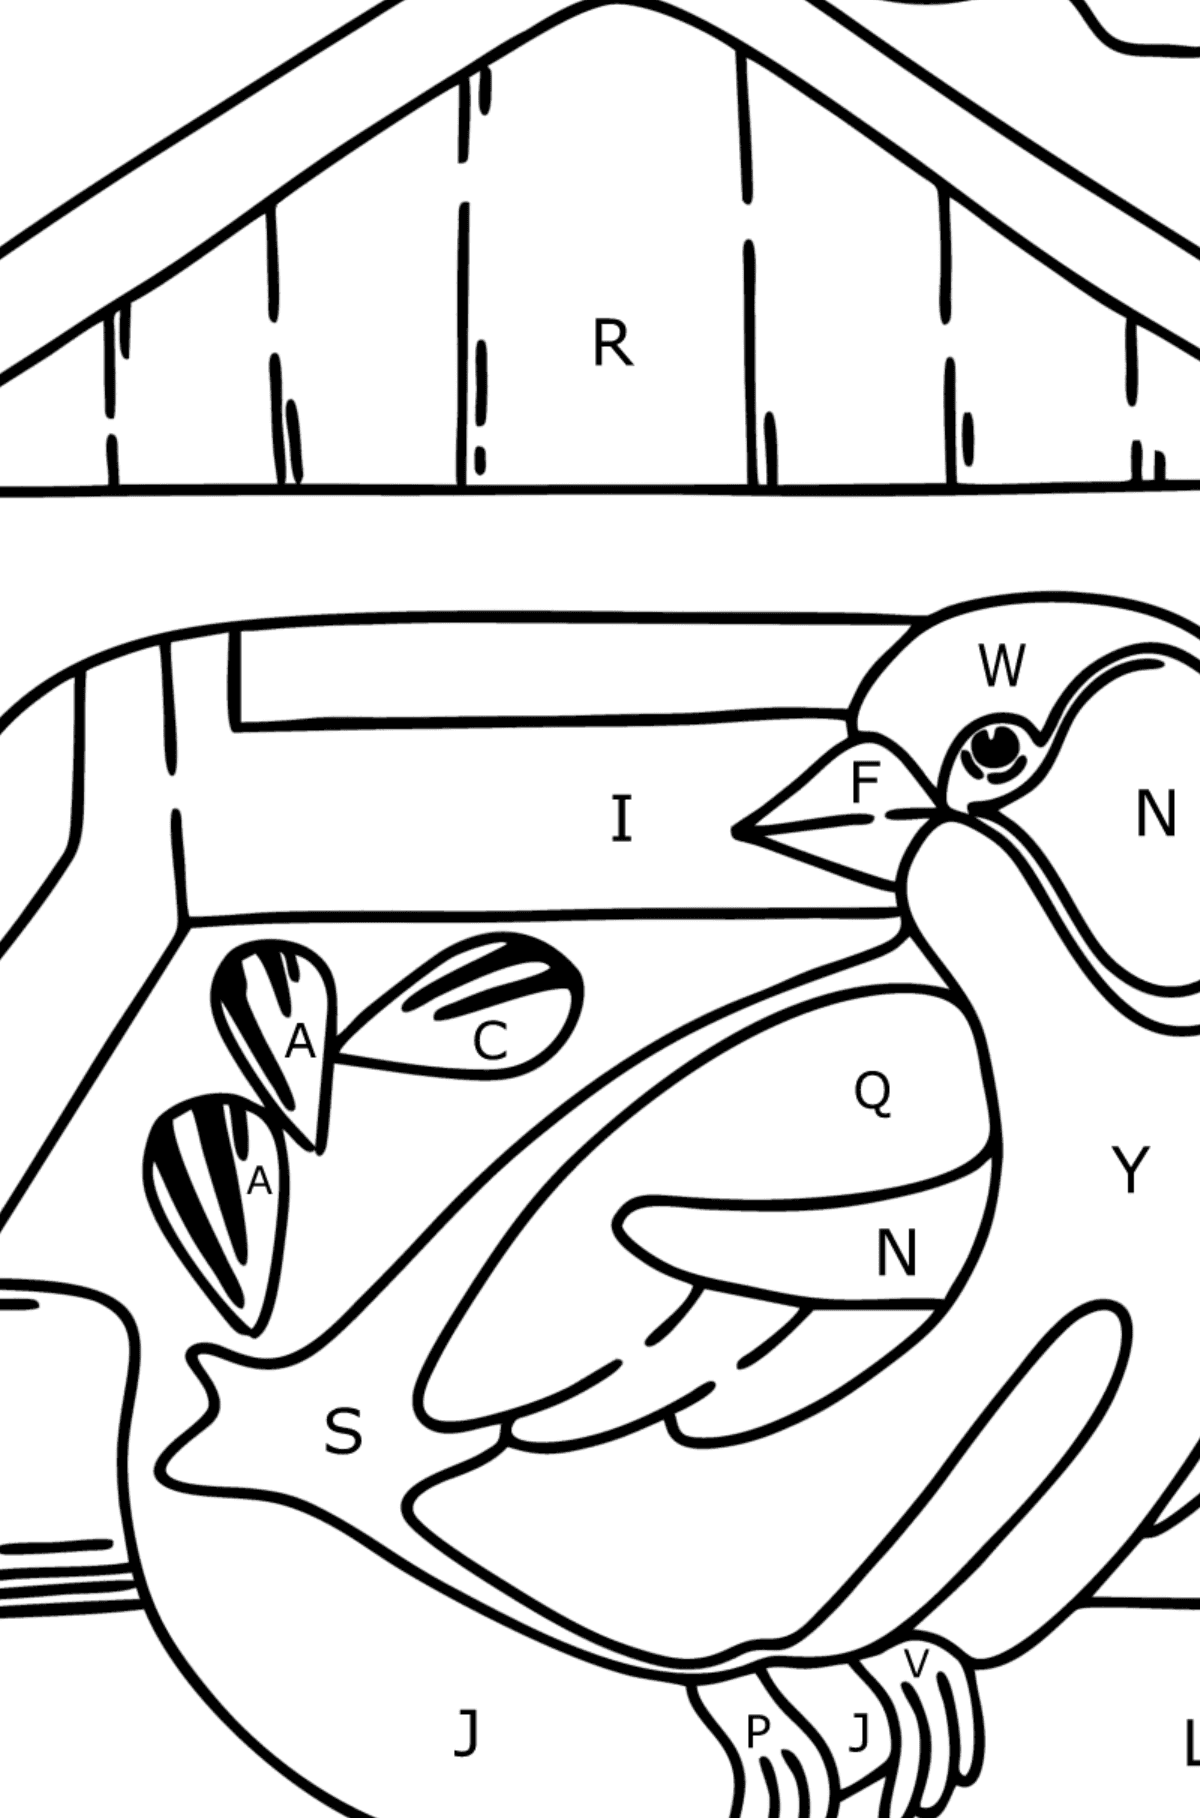 Coloring page - Bird feeder - Coloring by Letters for Kids